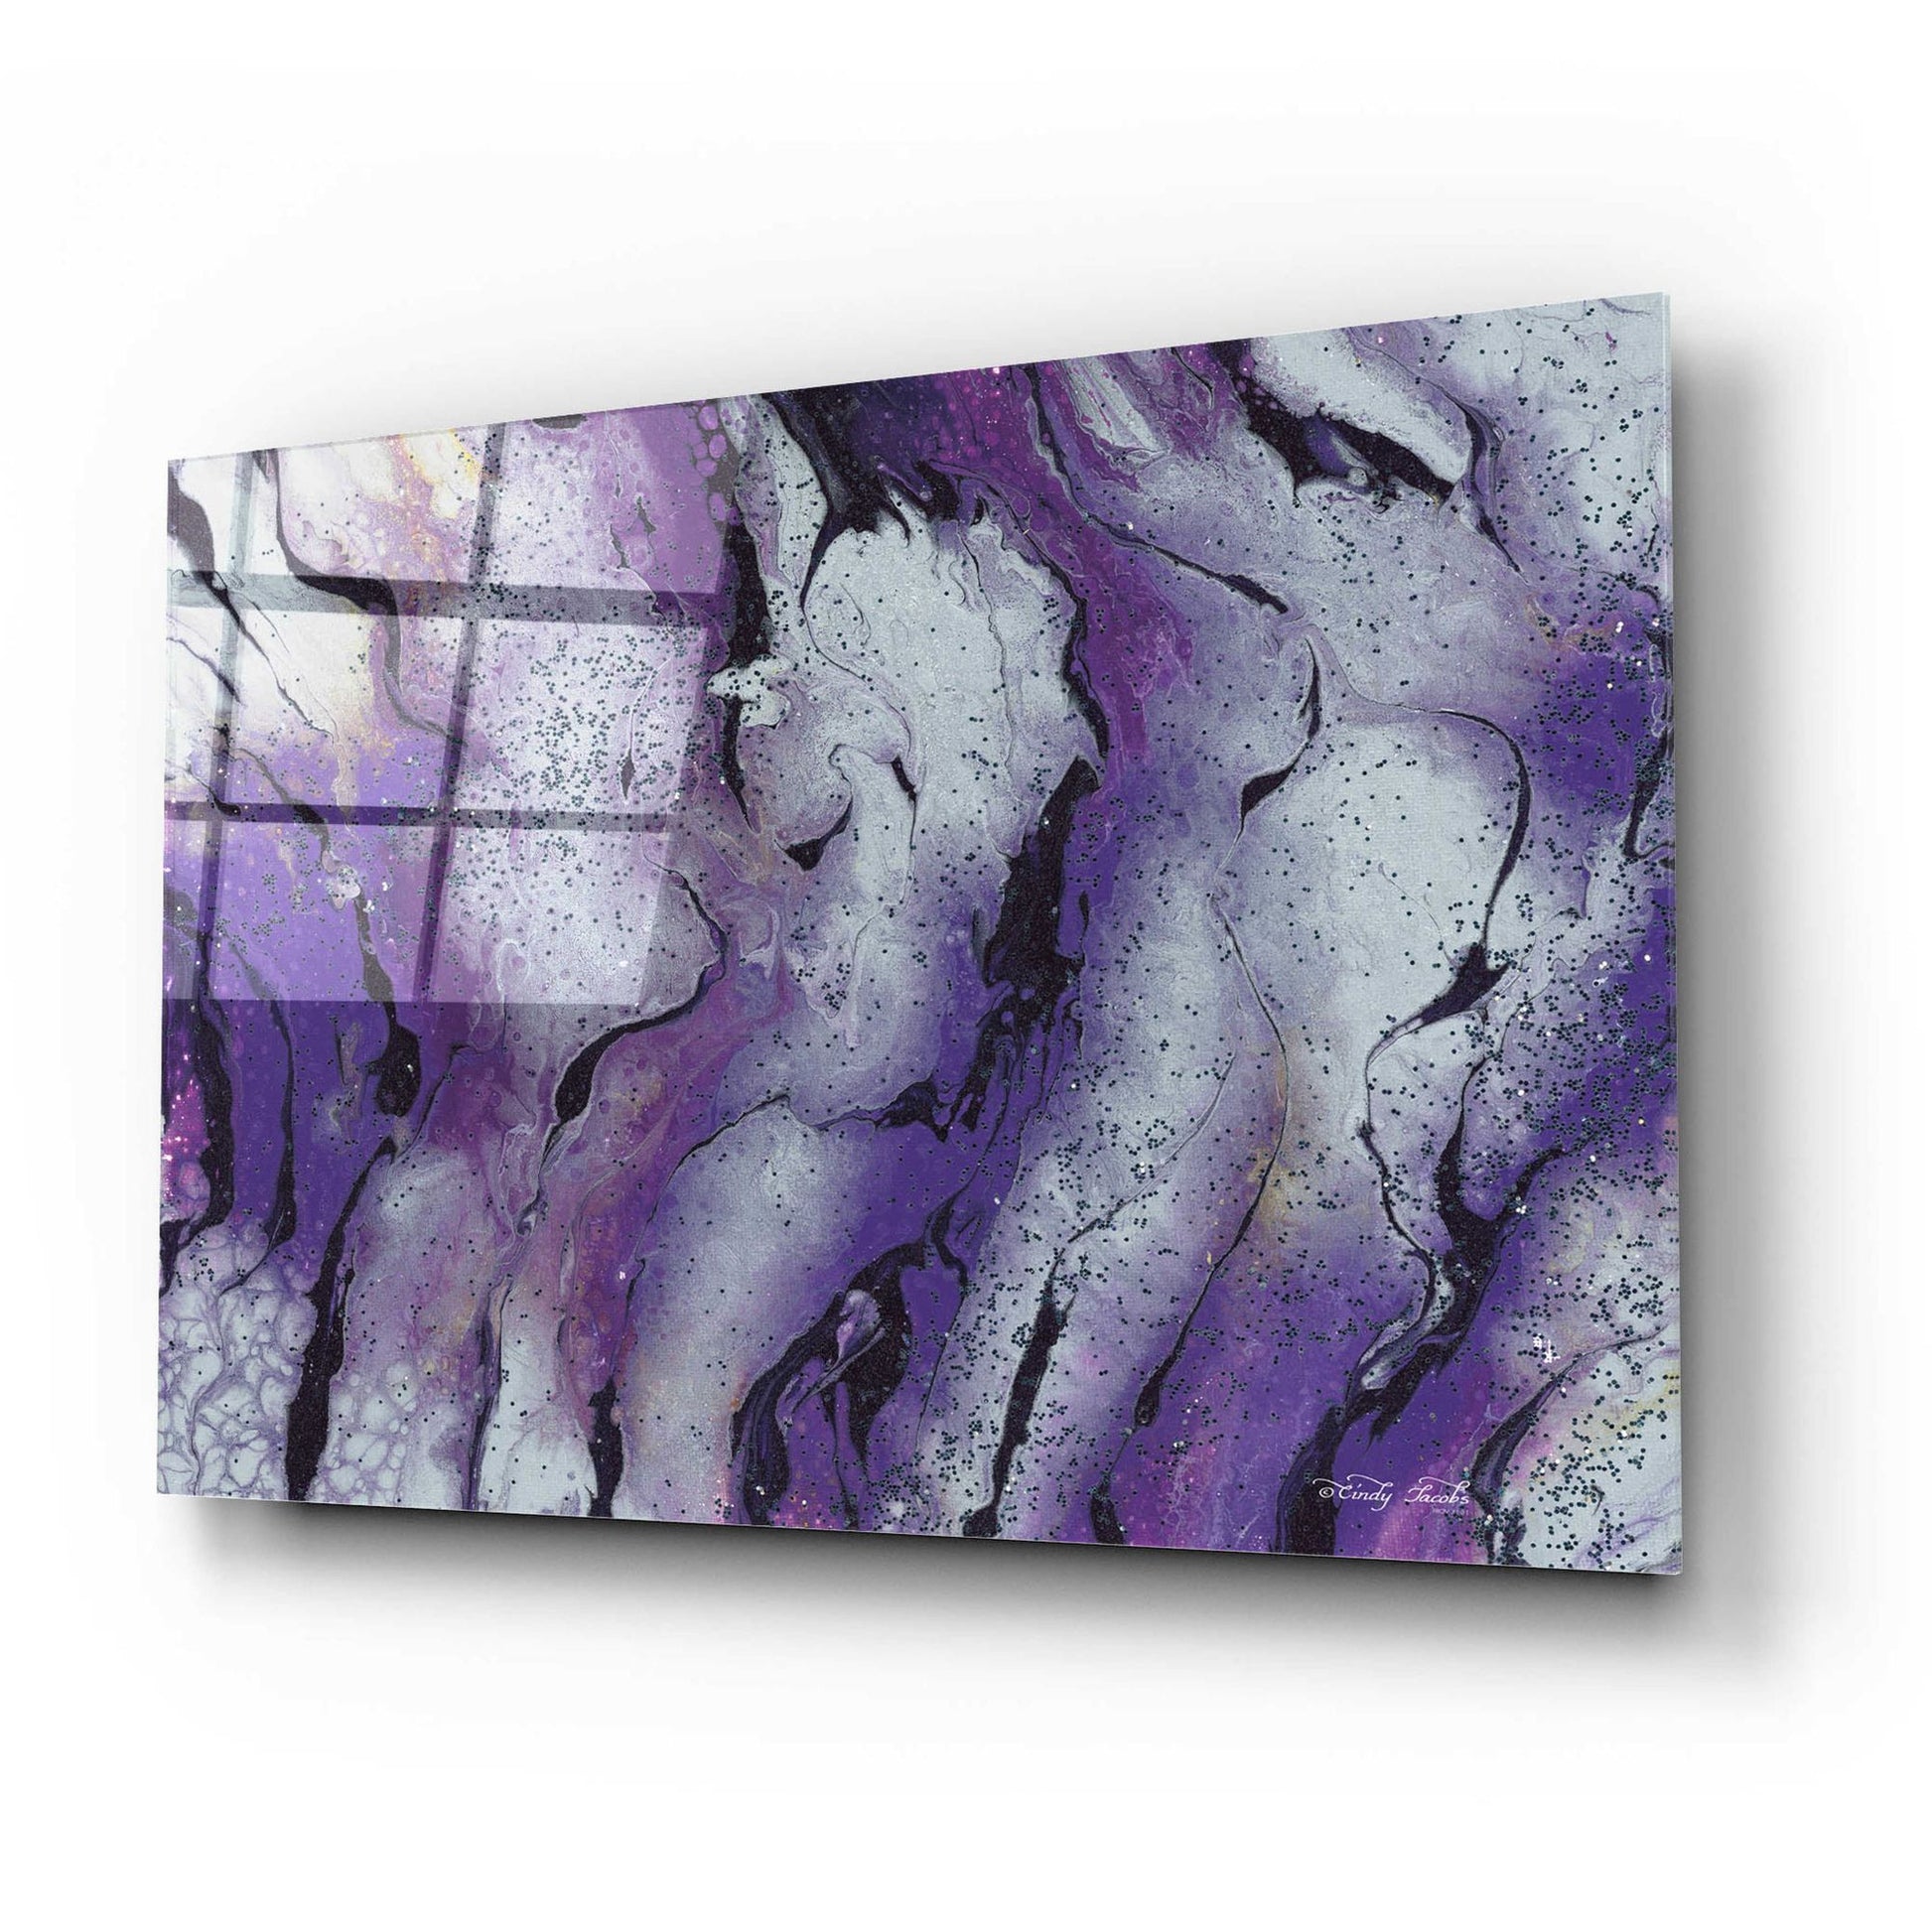 Epic Art 'Abstract in Purple III' by Cindy Jacobs, Acrylic Glass Wall Art,24x16